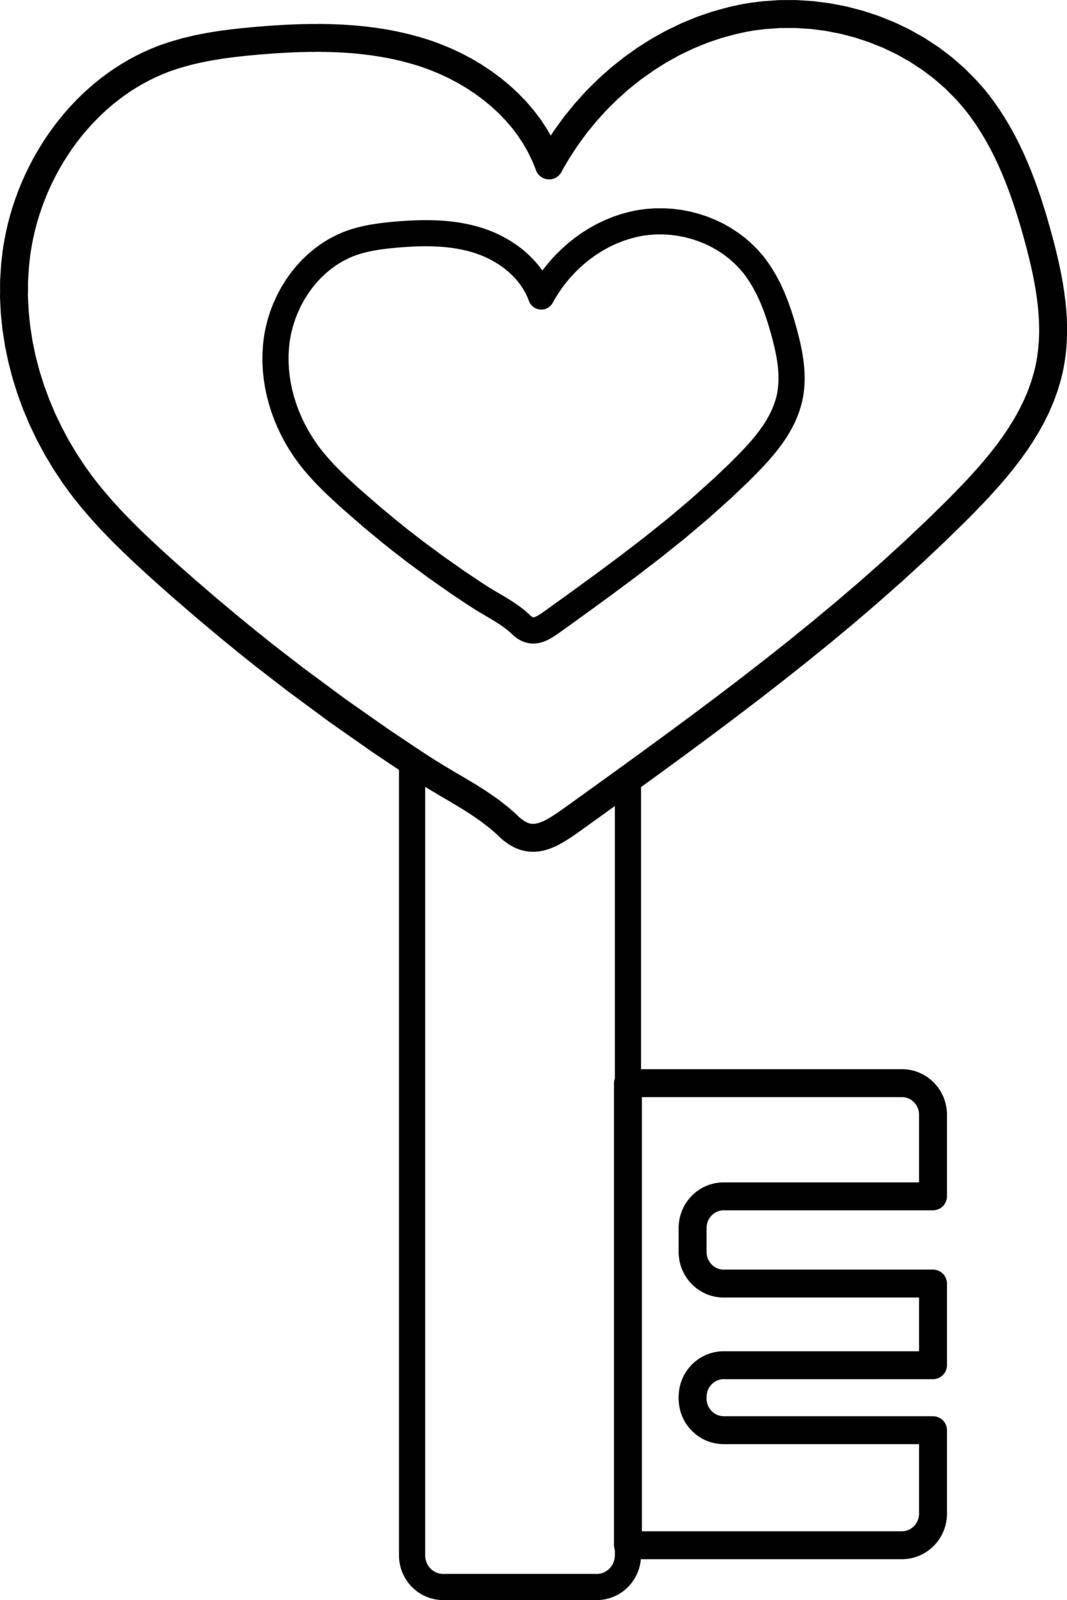 vector illustration of the contour of the key of the heart by Eldashev